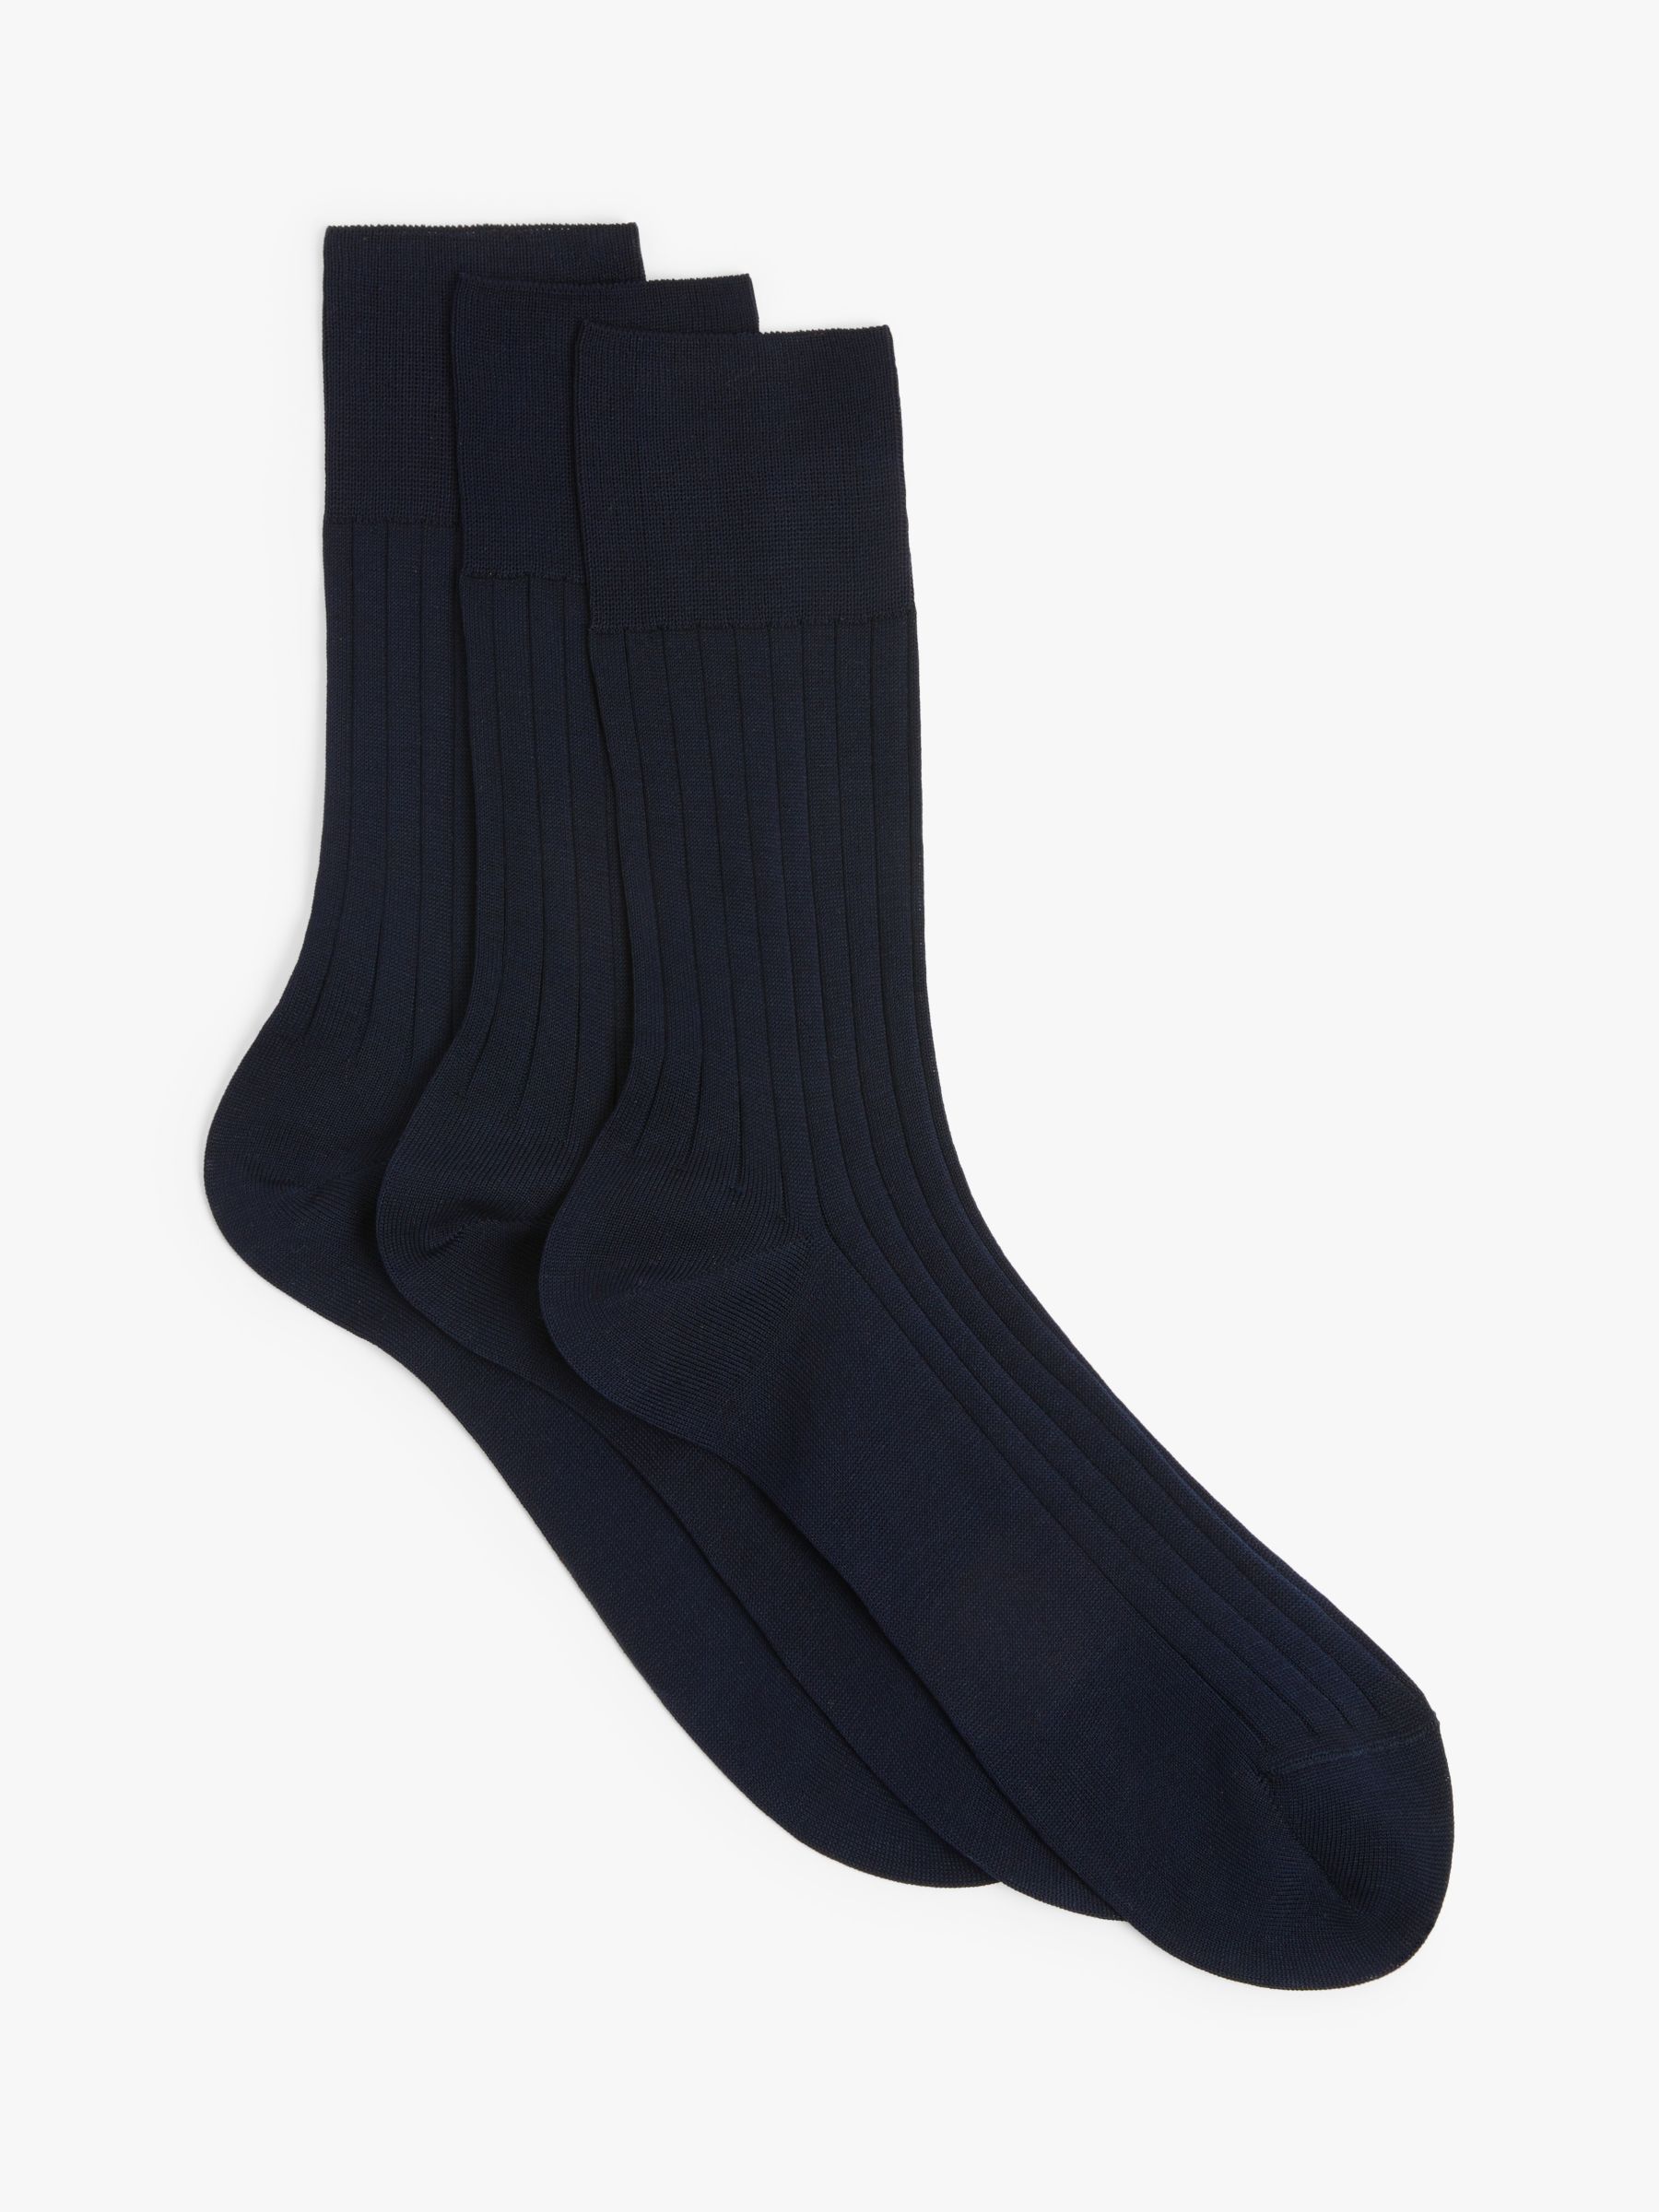 John Lewis Made in Italy Mercerised Cotton Socks, Pack of 3, Navy at ...